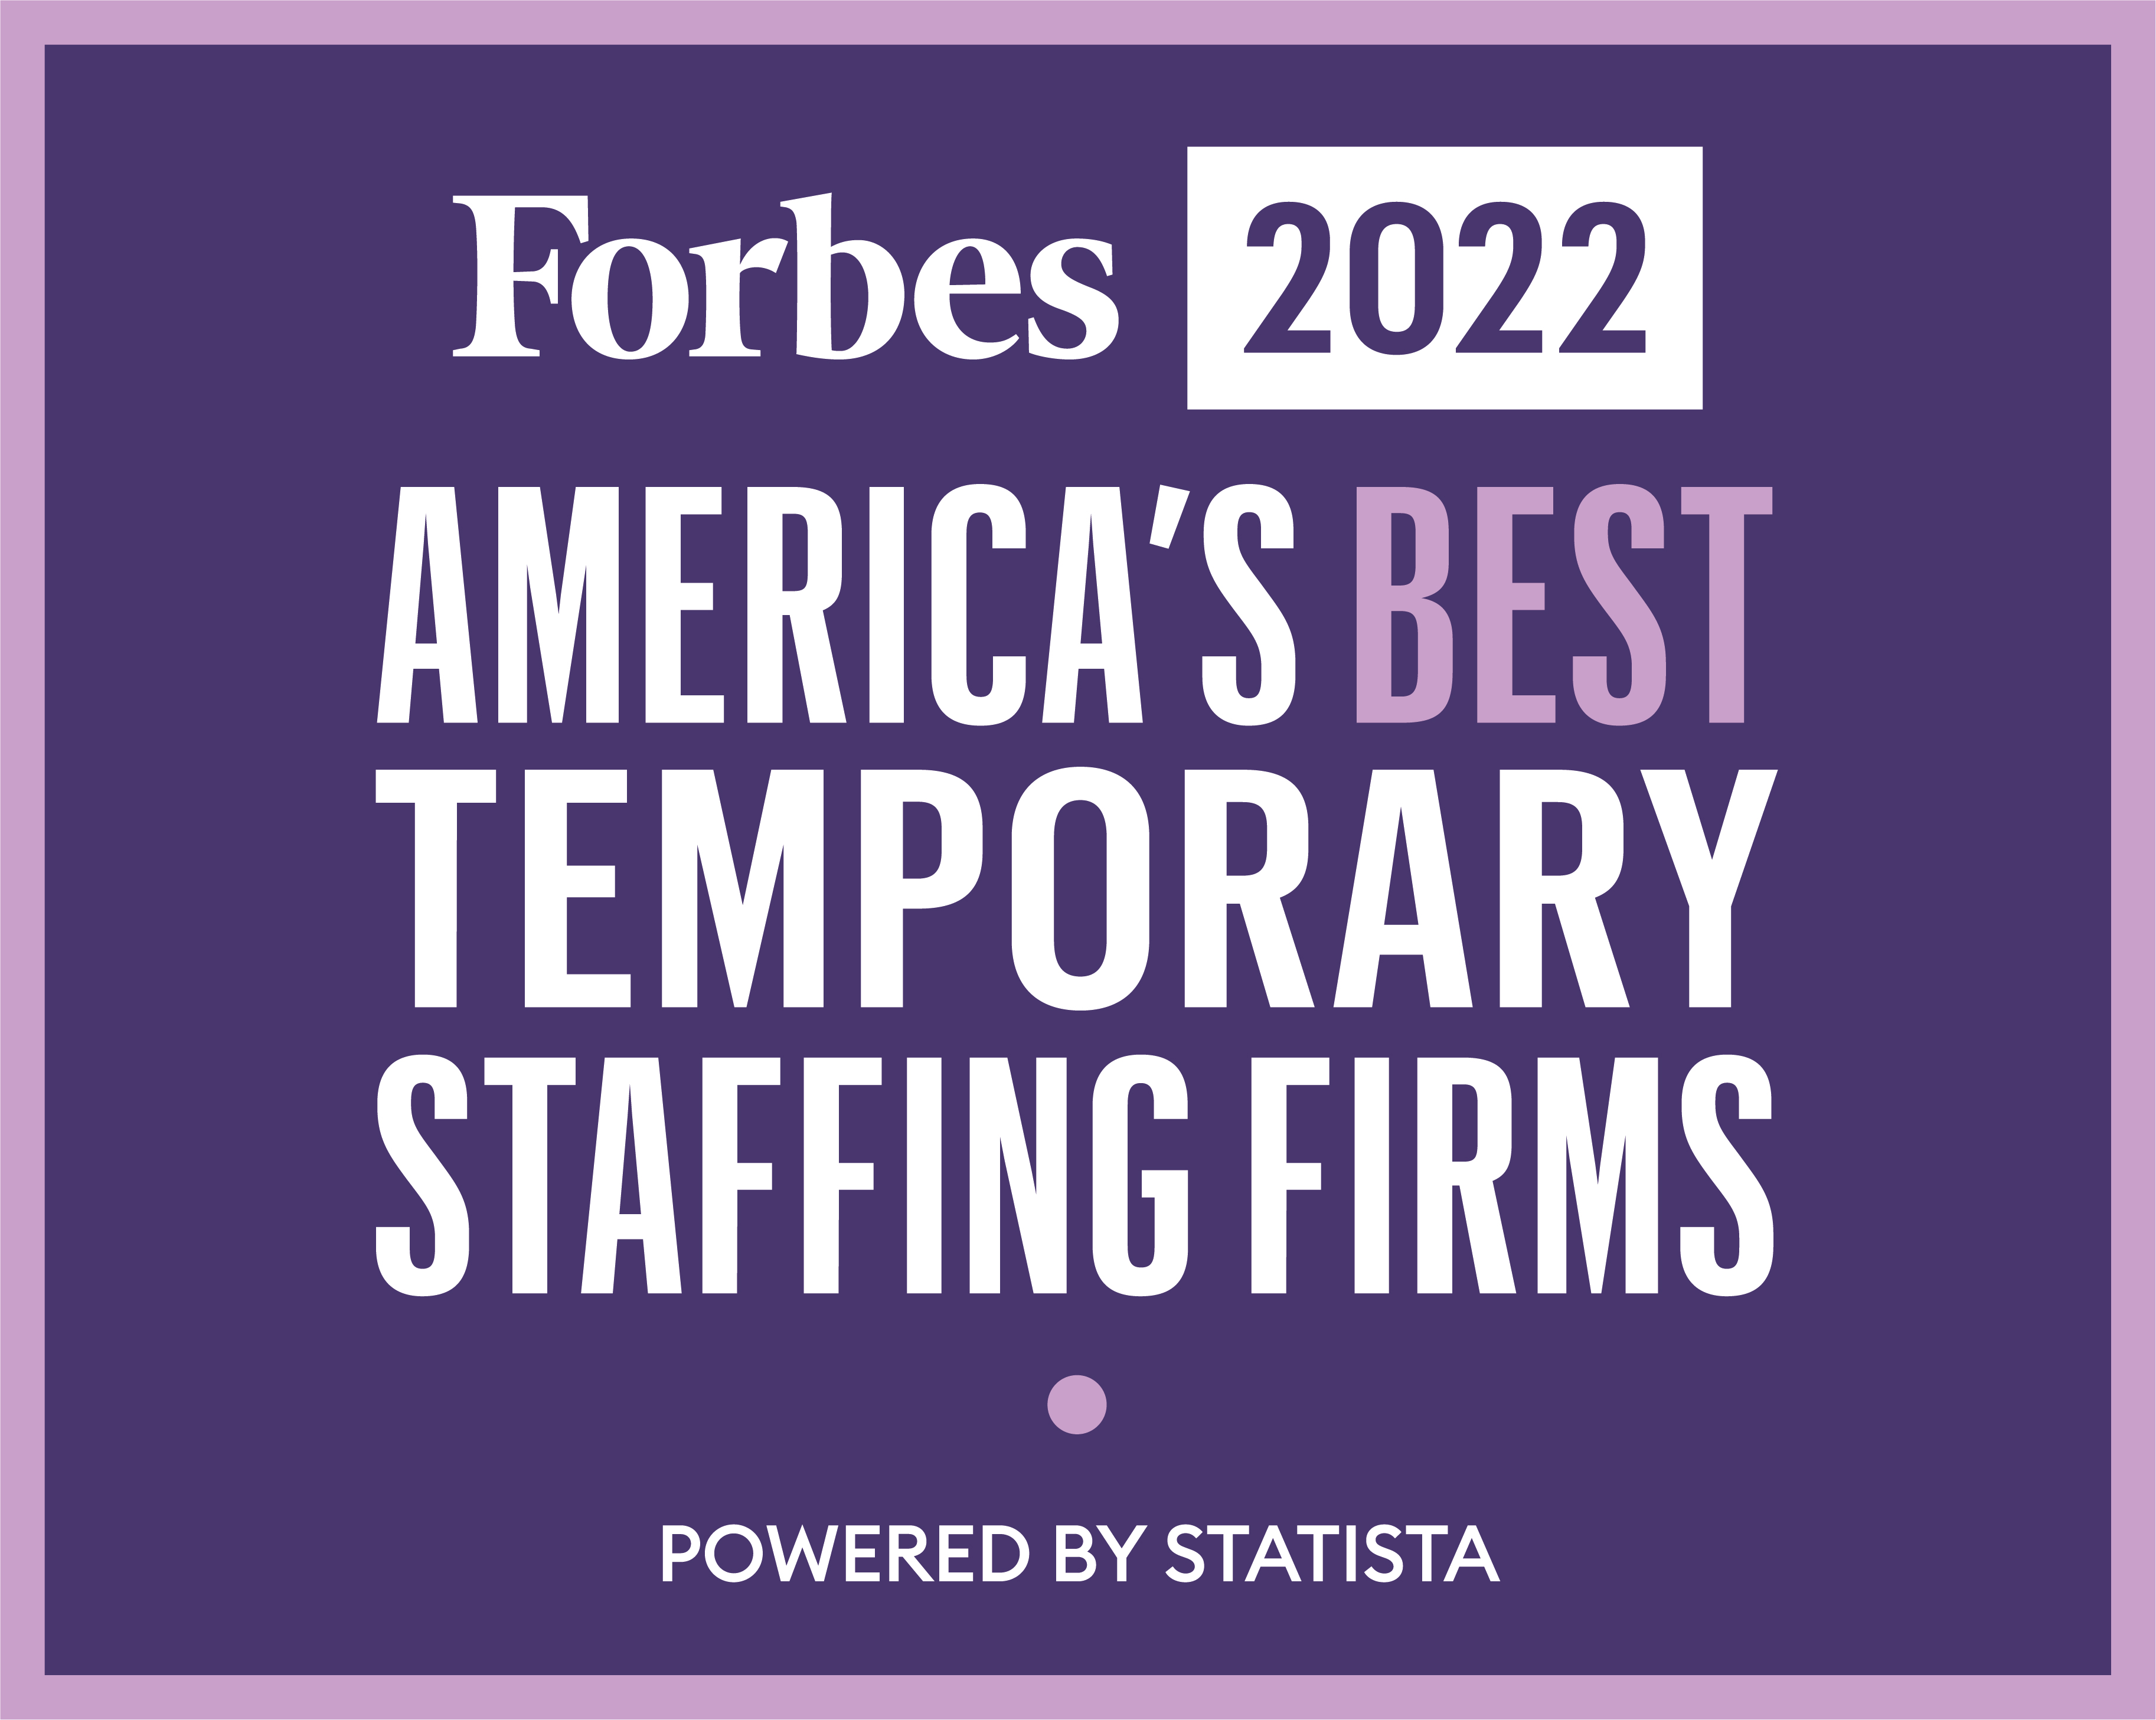 Forbes Best Temporary Staffing 2022